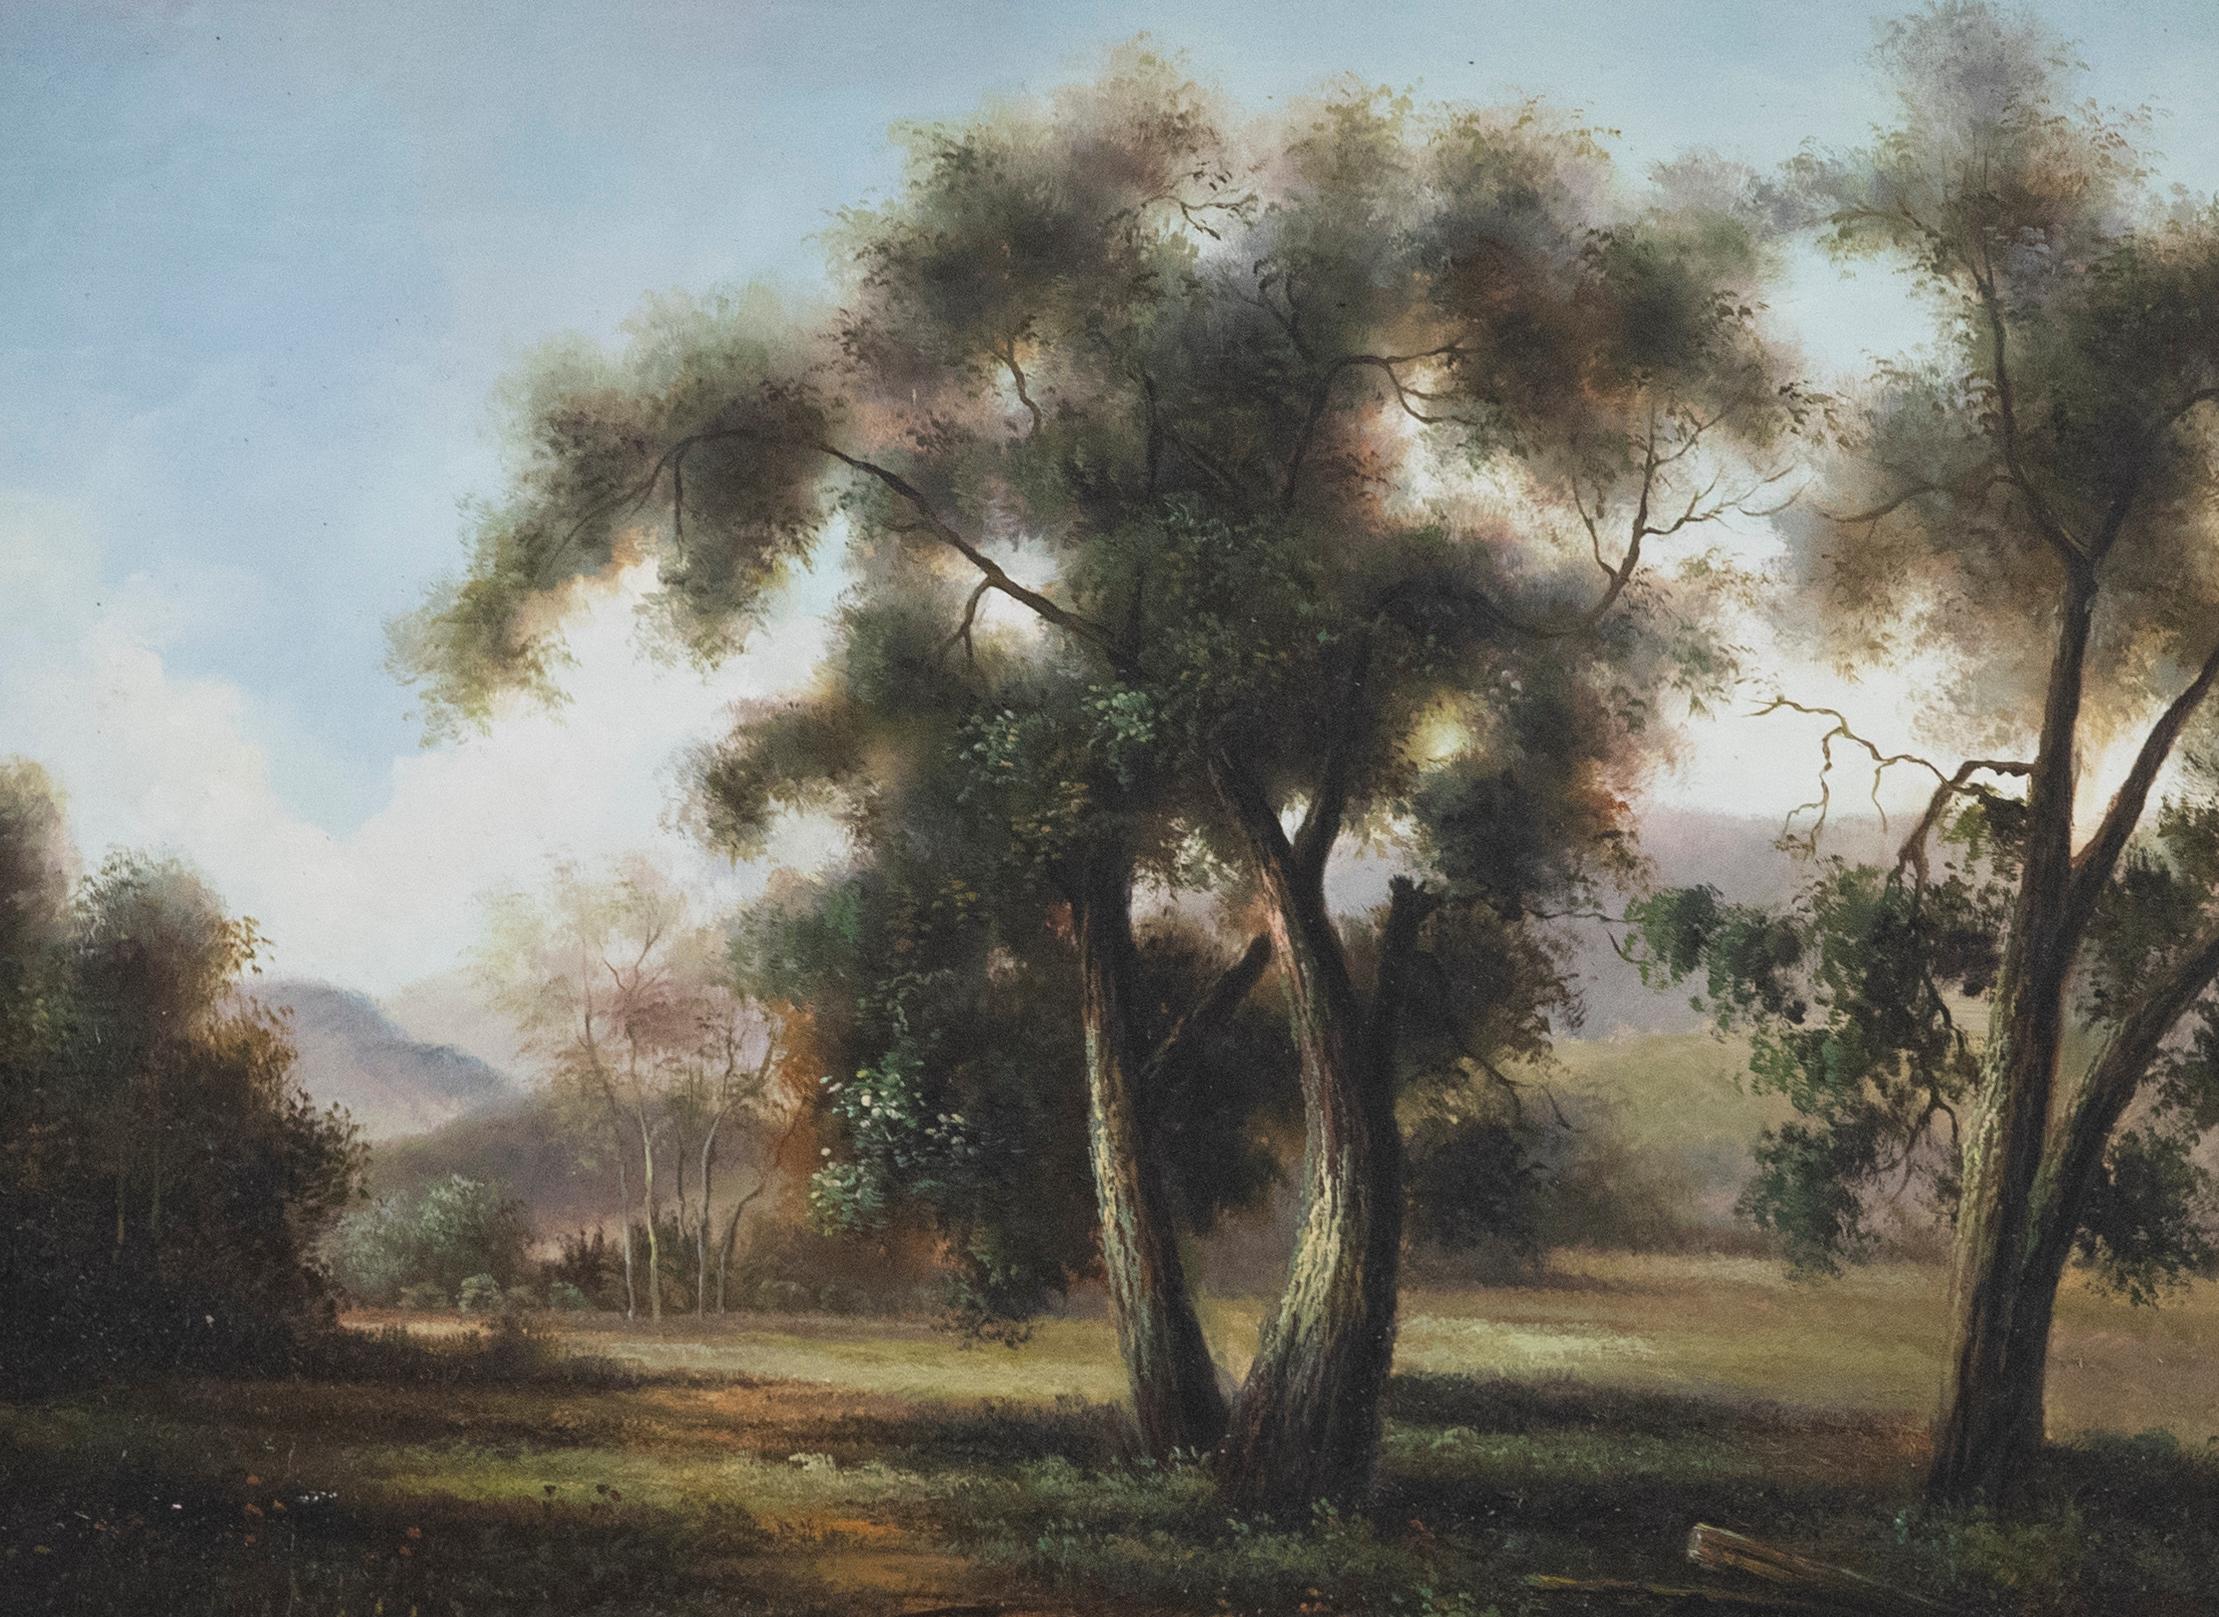 C. Daniel - 20th Century Oil, The Clearing - Painting by Unknown